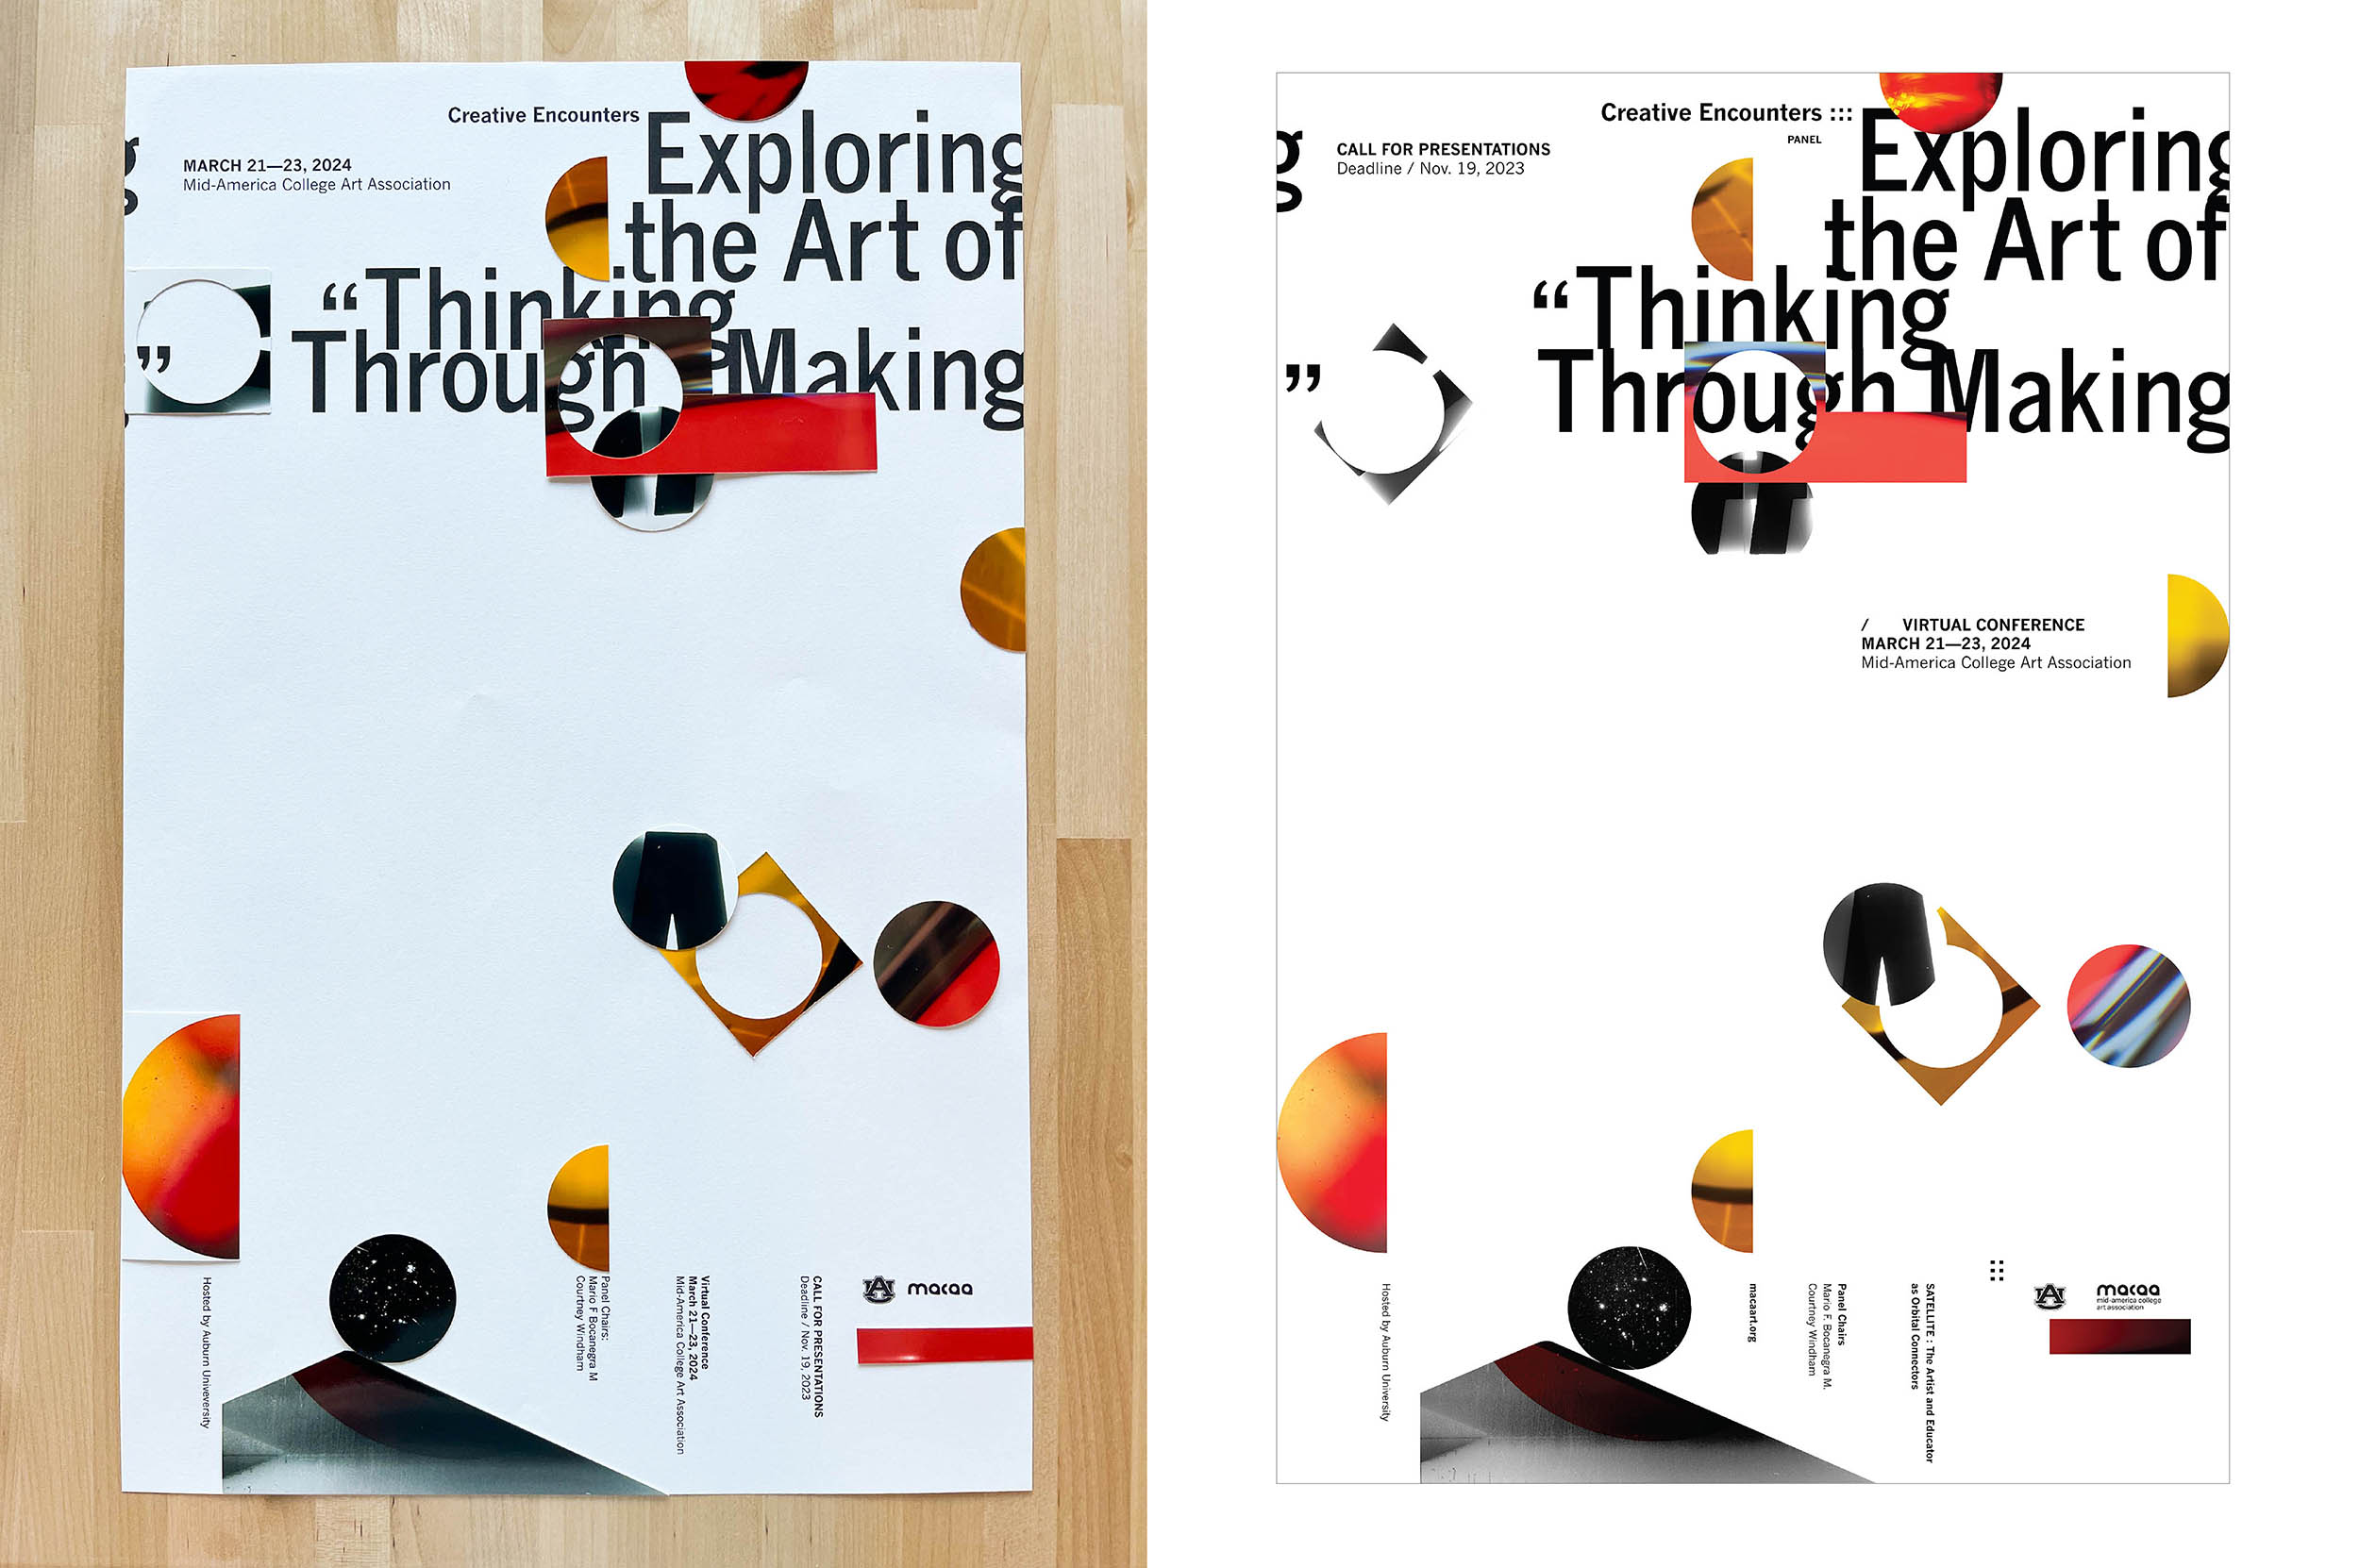 Poster design for "Creative Encounters: Exploring the Art of 'Thinking Through Making'" by Courtney Windham and Mario Bocanegra